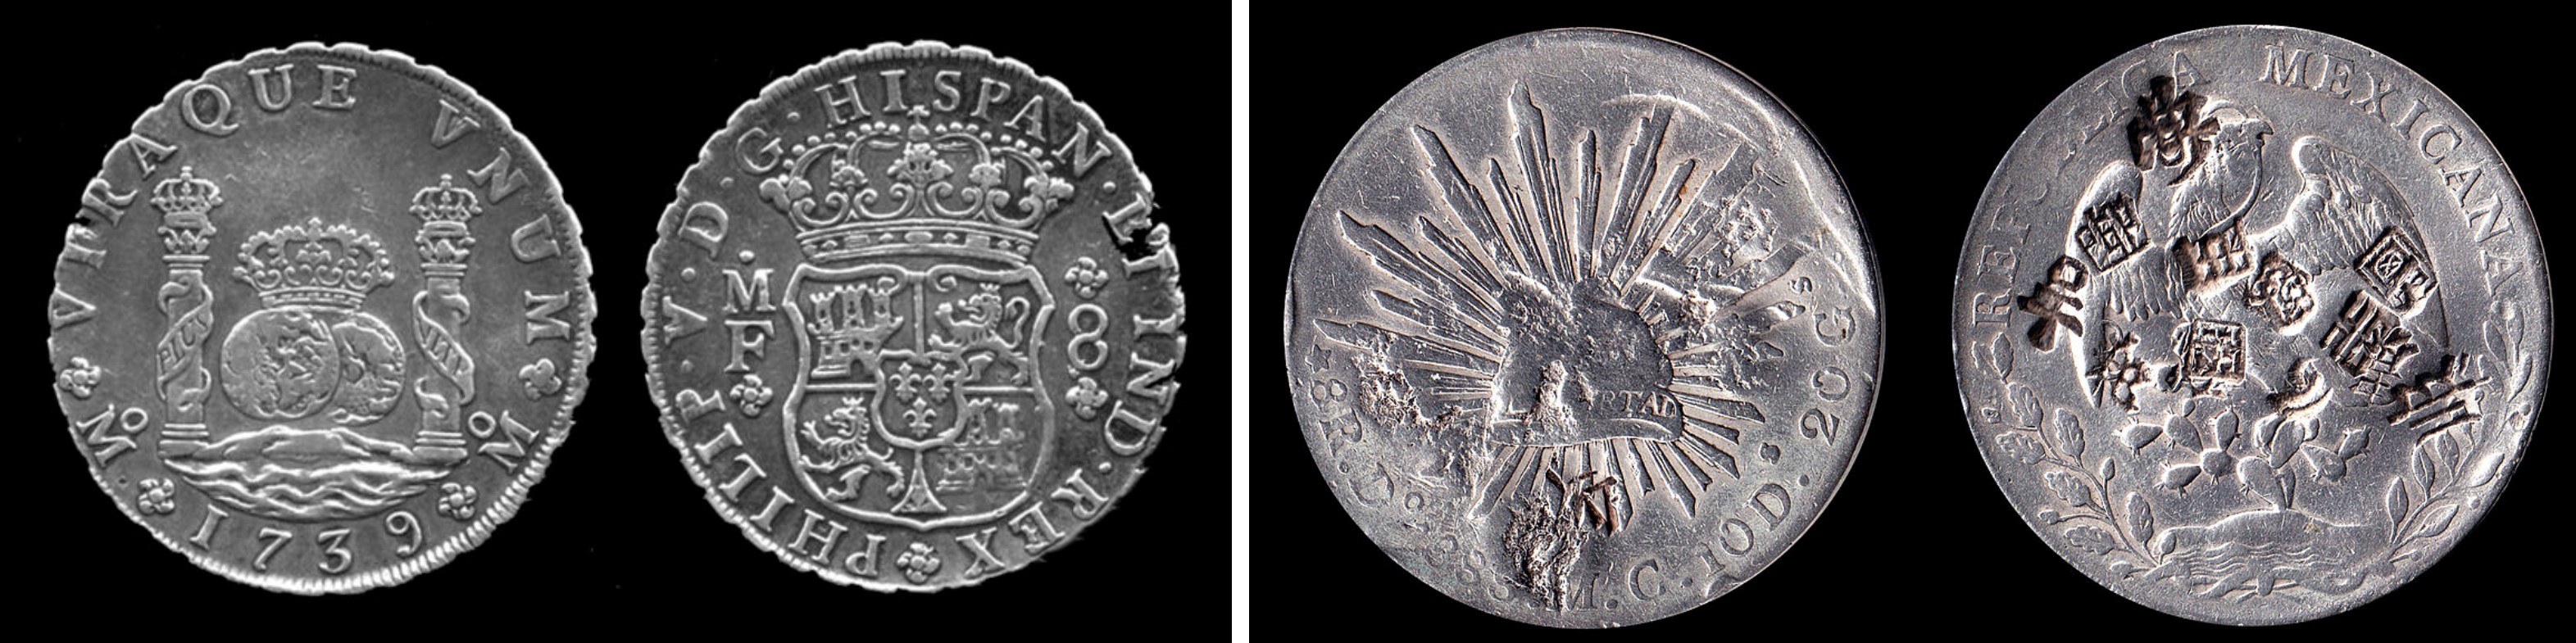 On the left, a silver peso of Philip V of Spain. On the right, 1888 'Trade Coins' from Mexico.